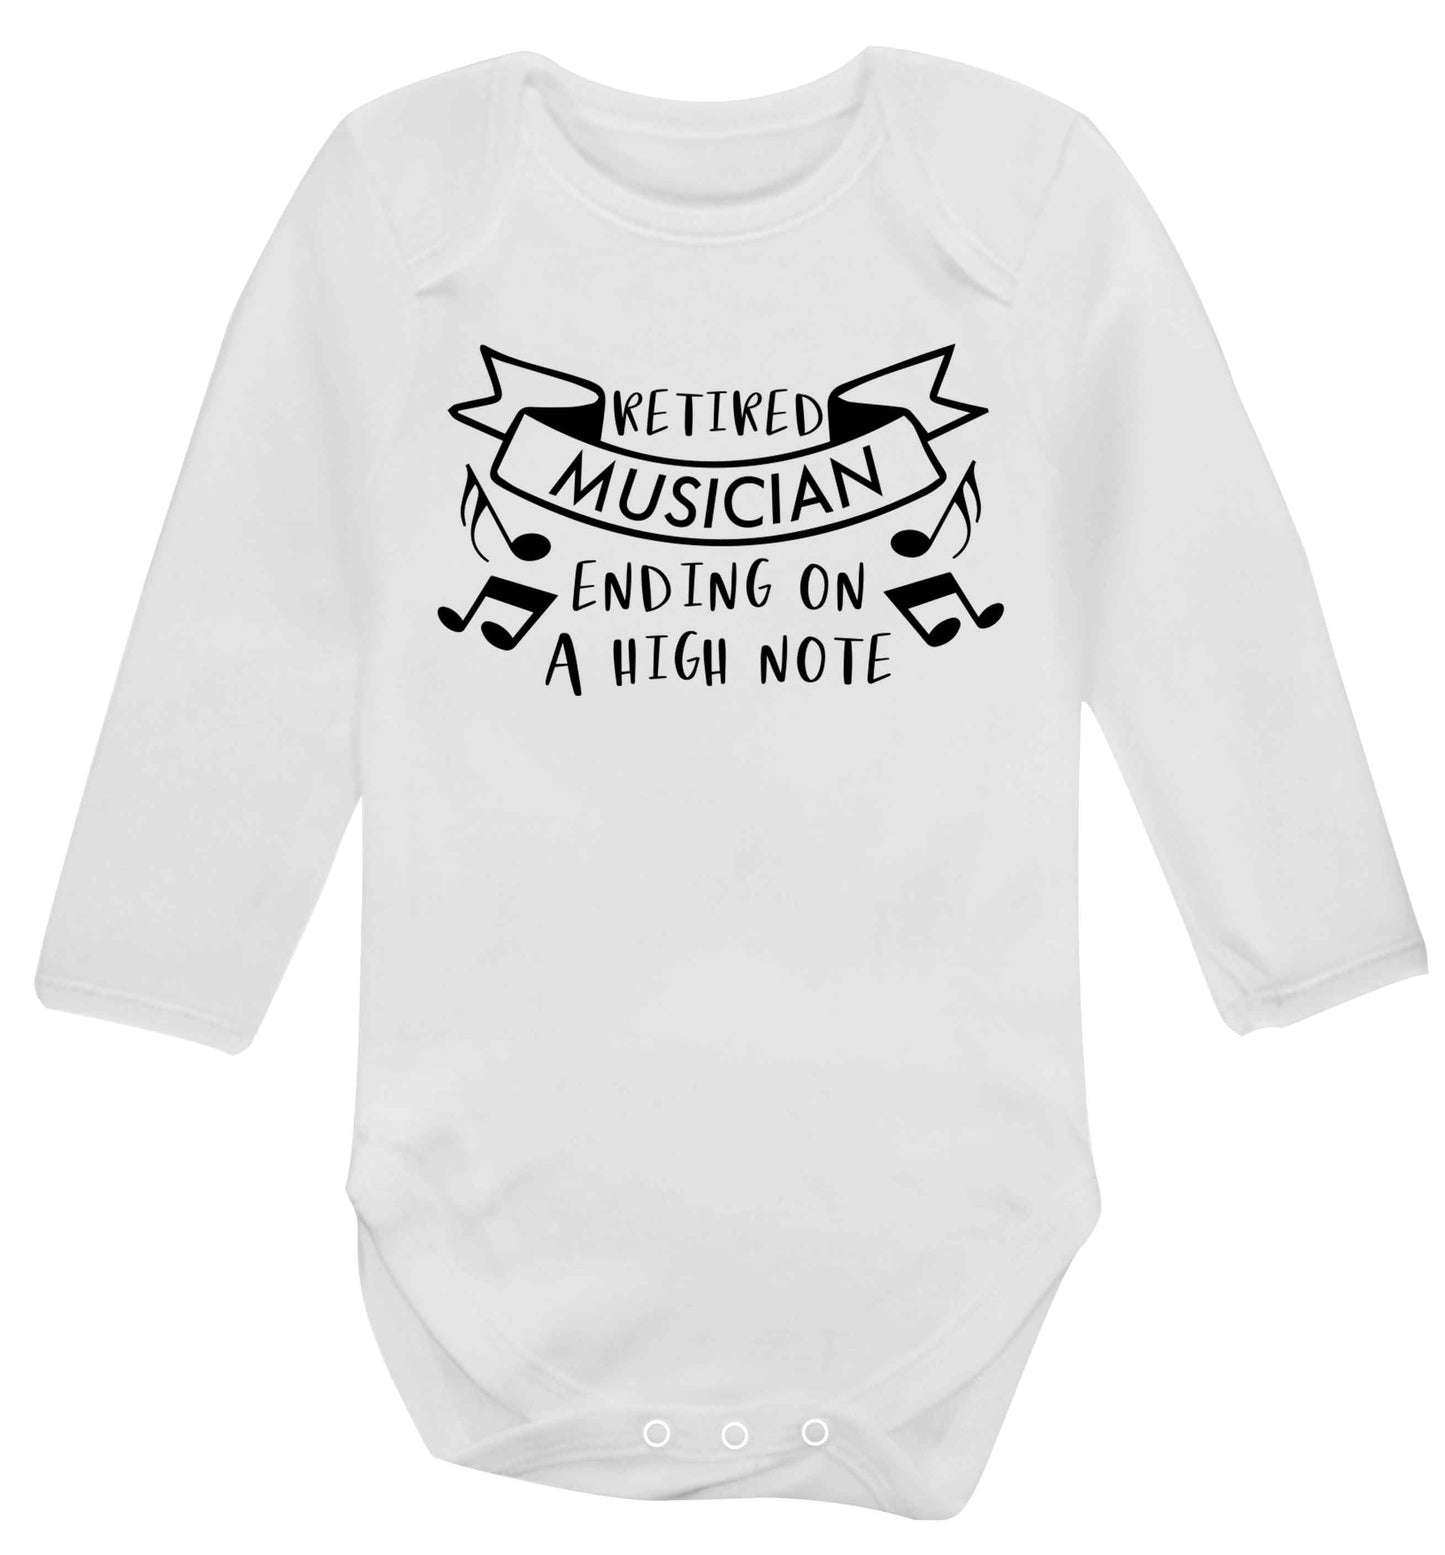 Retired musician ending on a high note Baby Vest long sleeved white 6-12 months